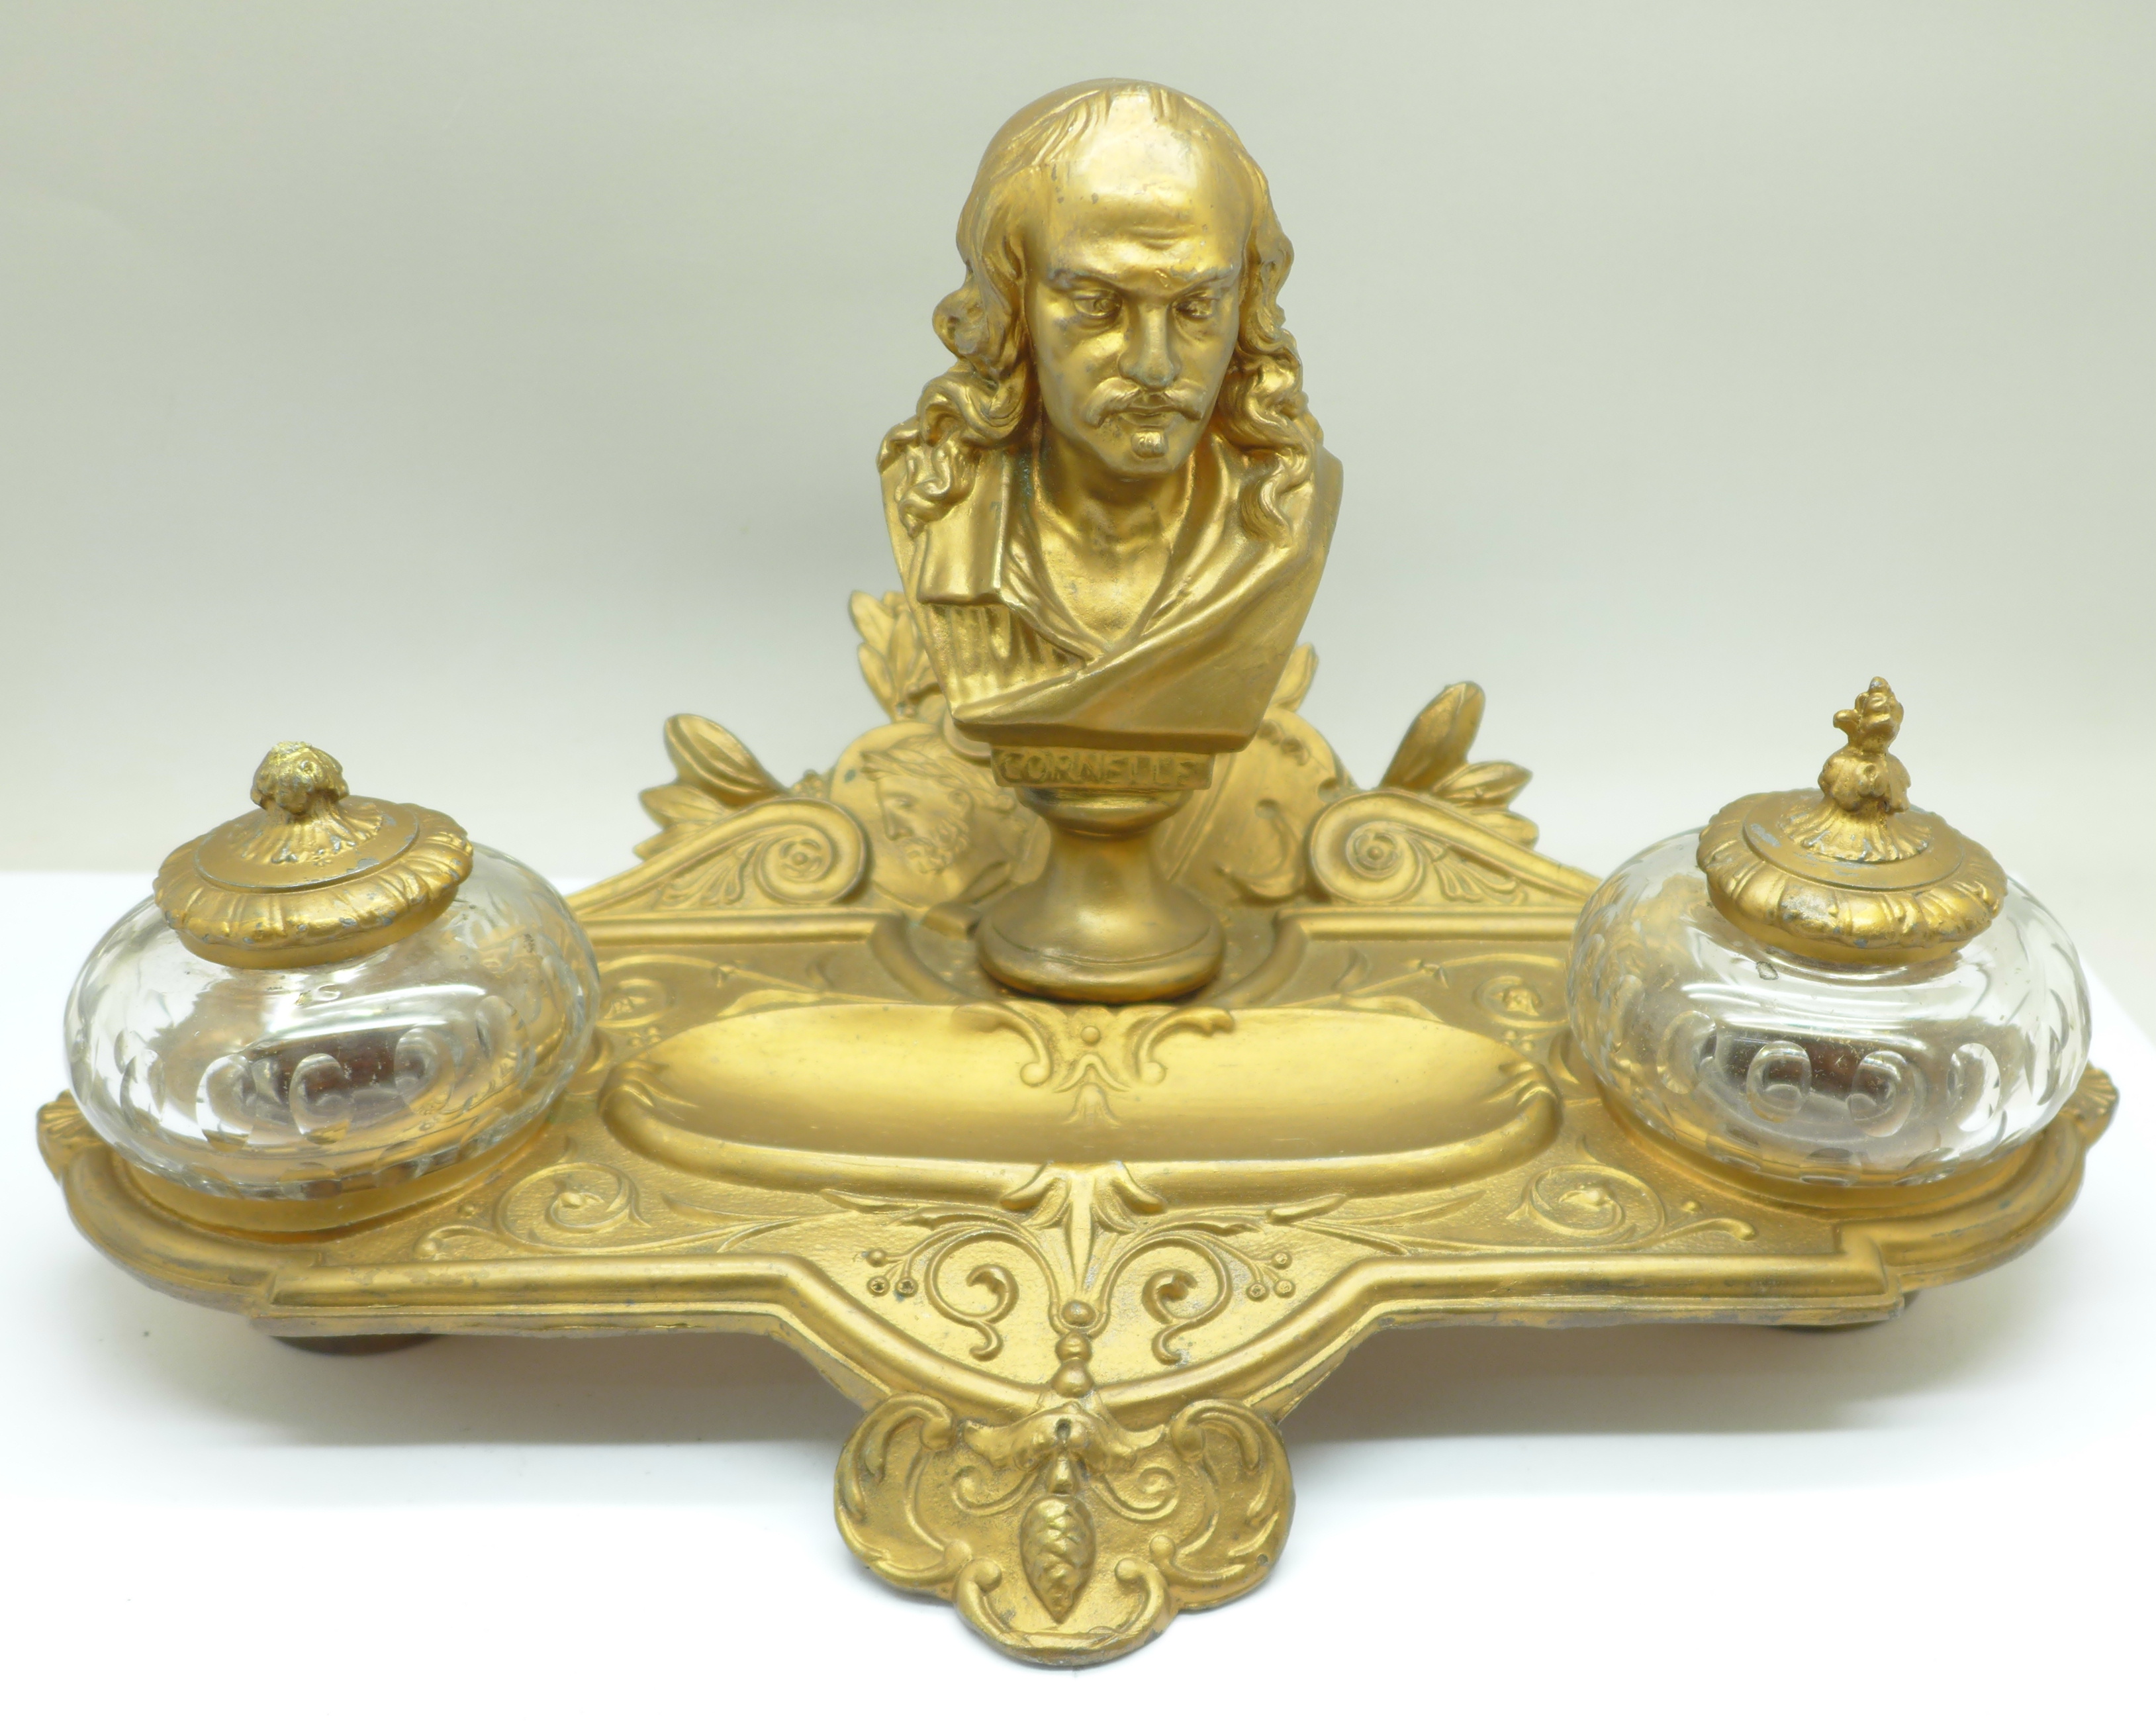 A c.1900 metal inkstand with two glass inkwells, one top a/f, mounted with a bust marked Cornelle